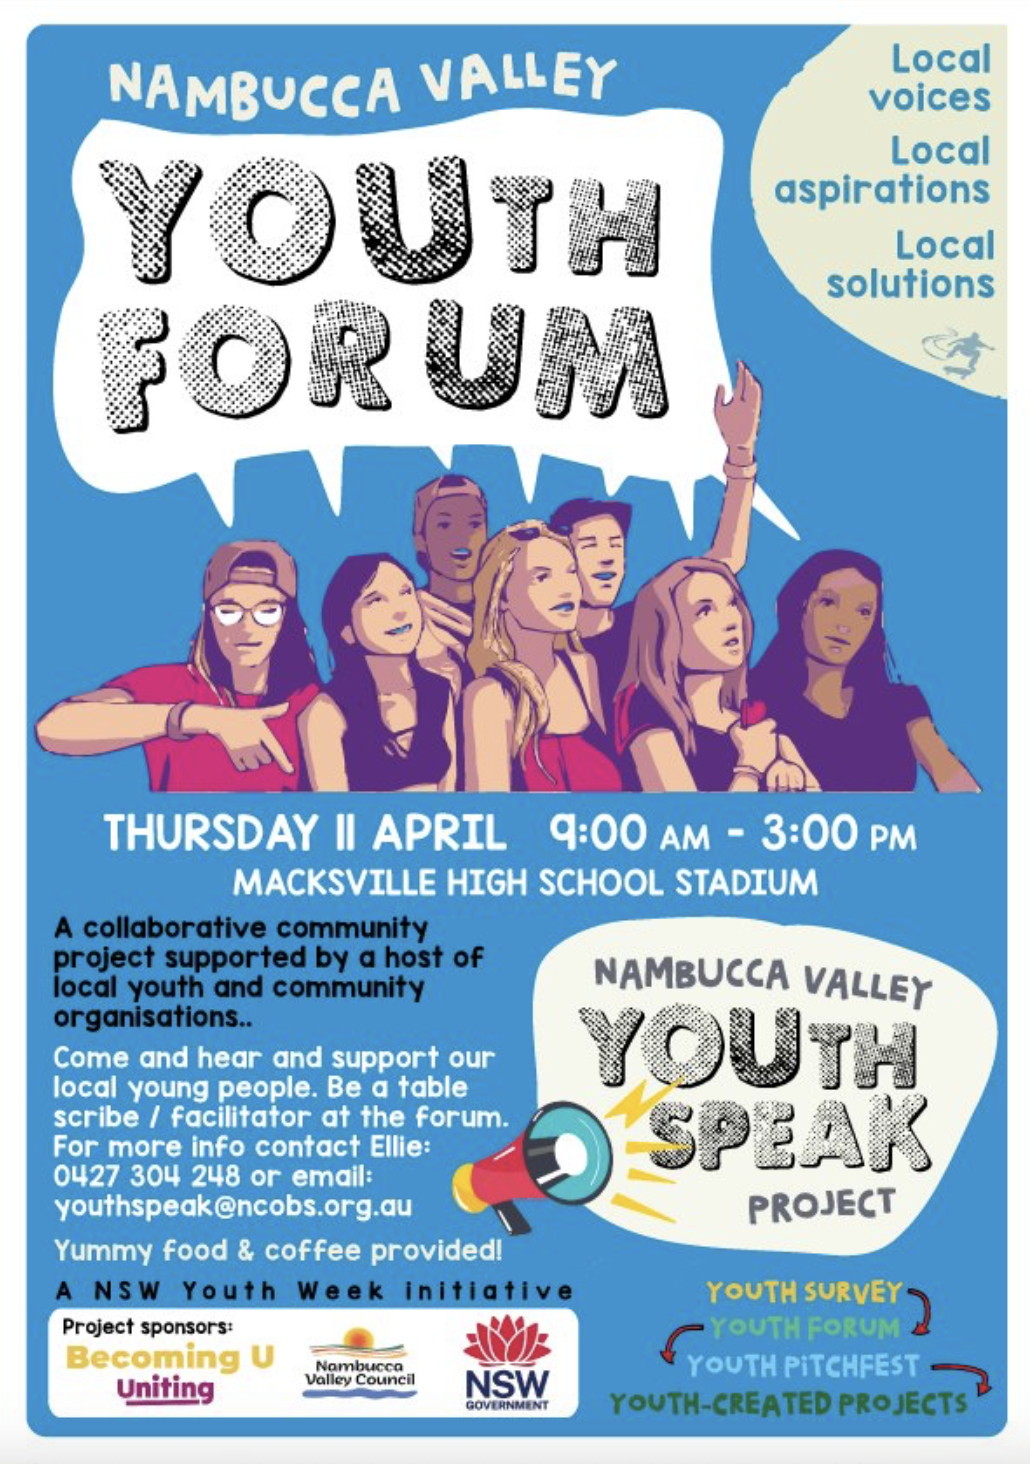 Nambucca Valley Youth Forum